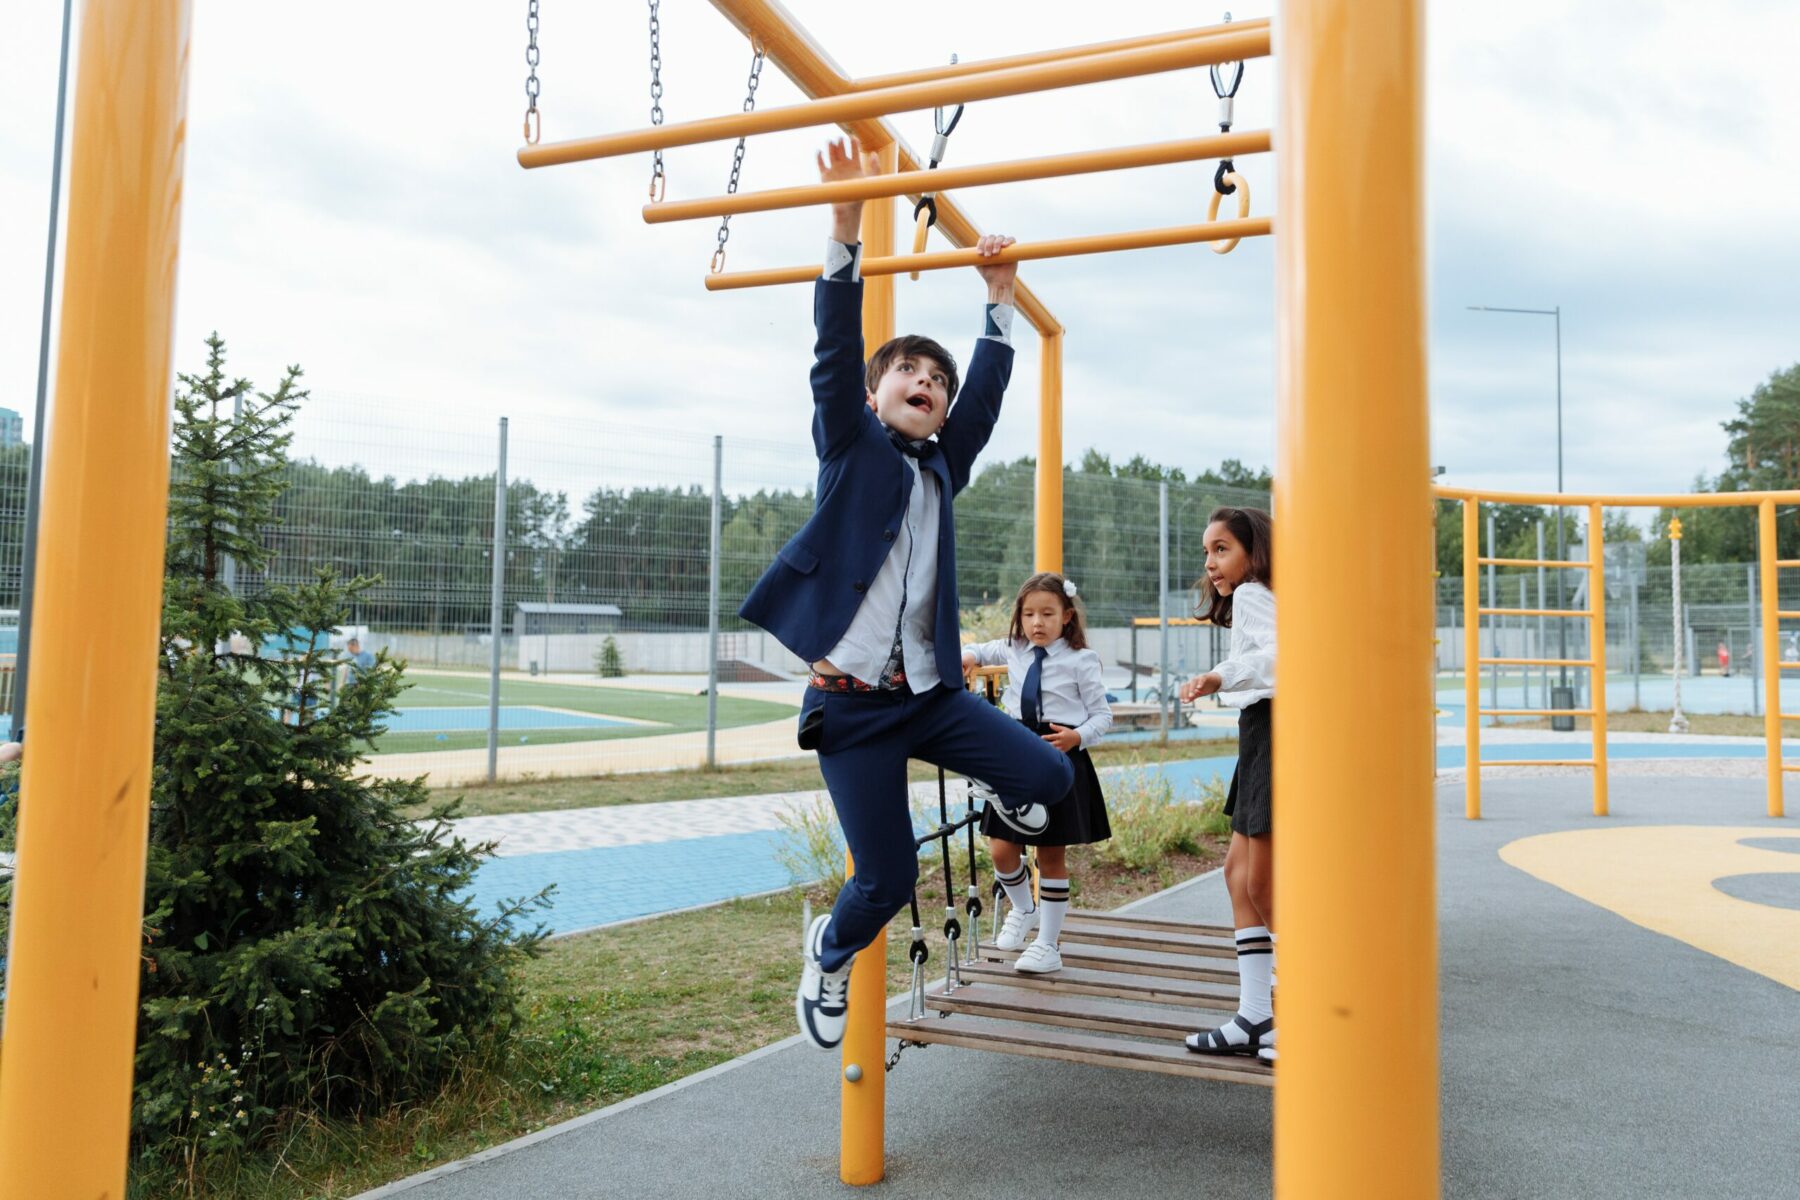 How to Use Playgrounds as Gym Equipment